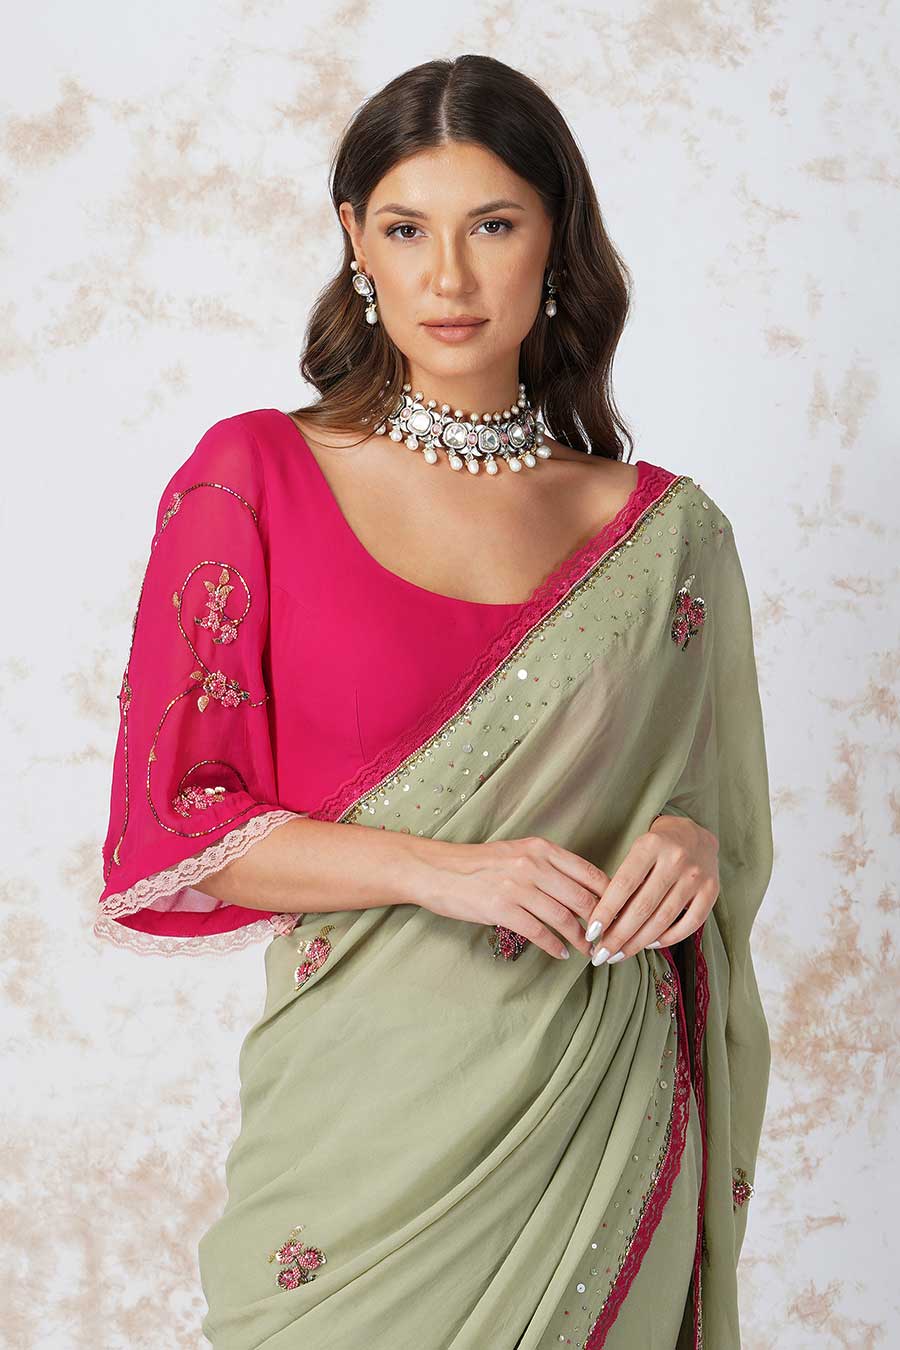 Beaded Green Saree & Pink Unstitched Blouse Set